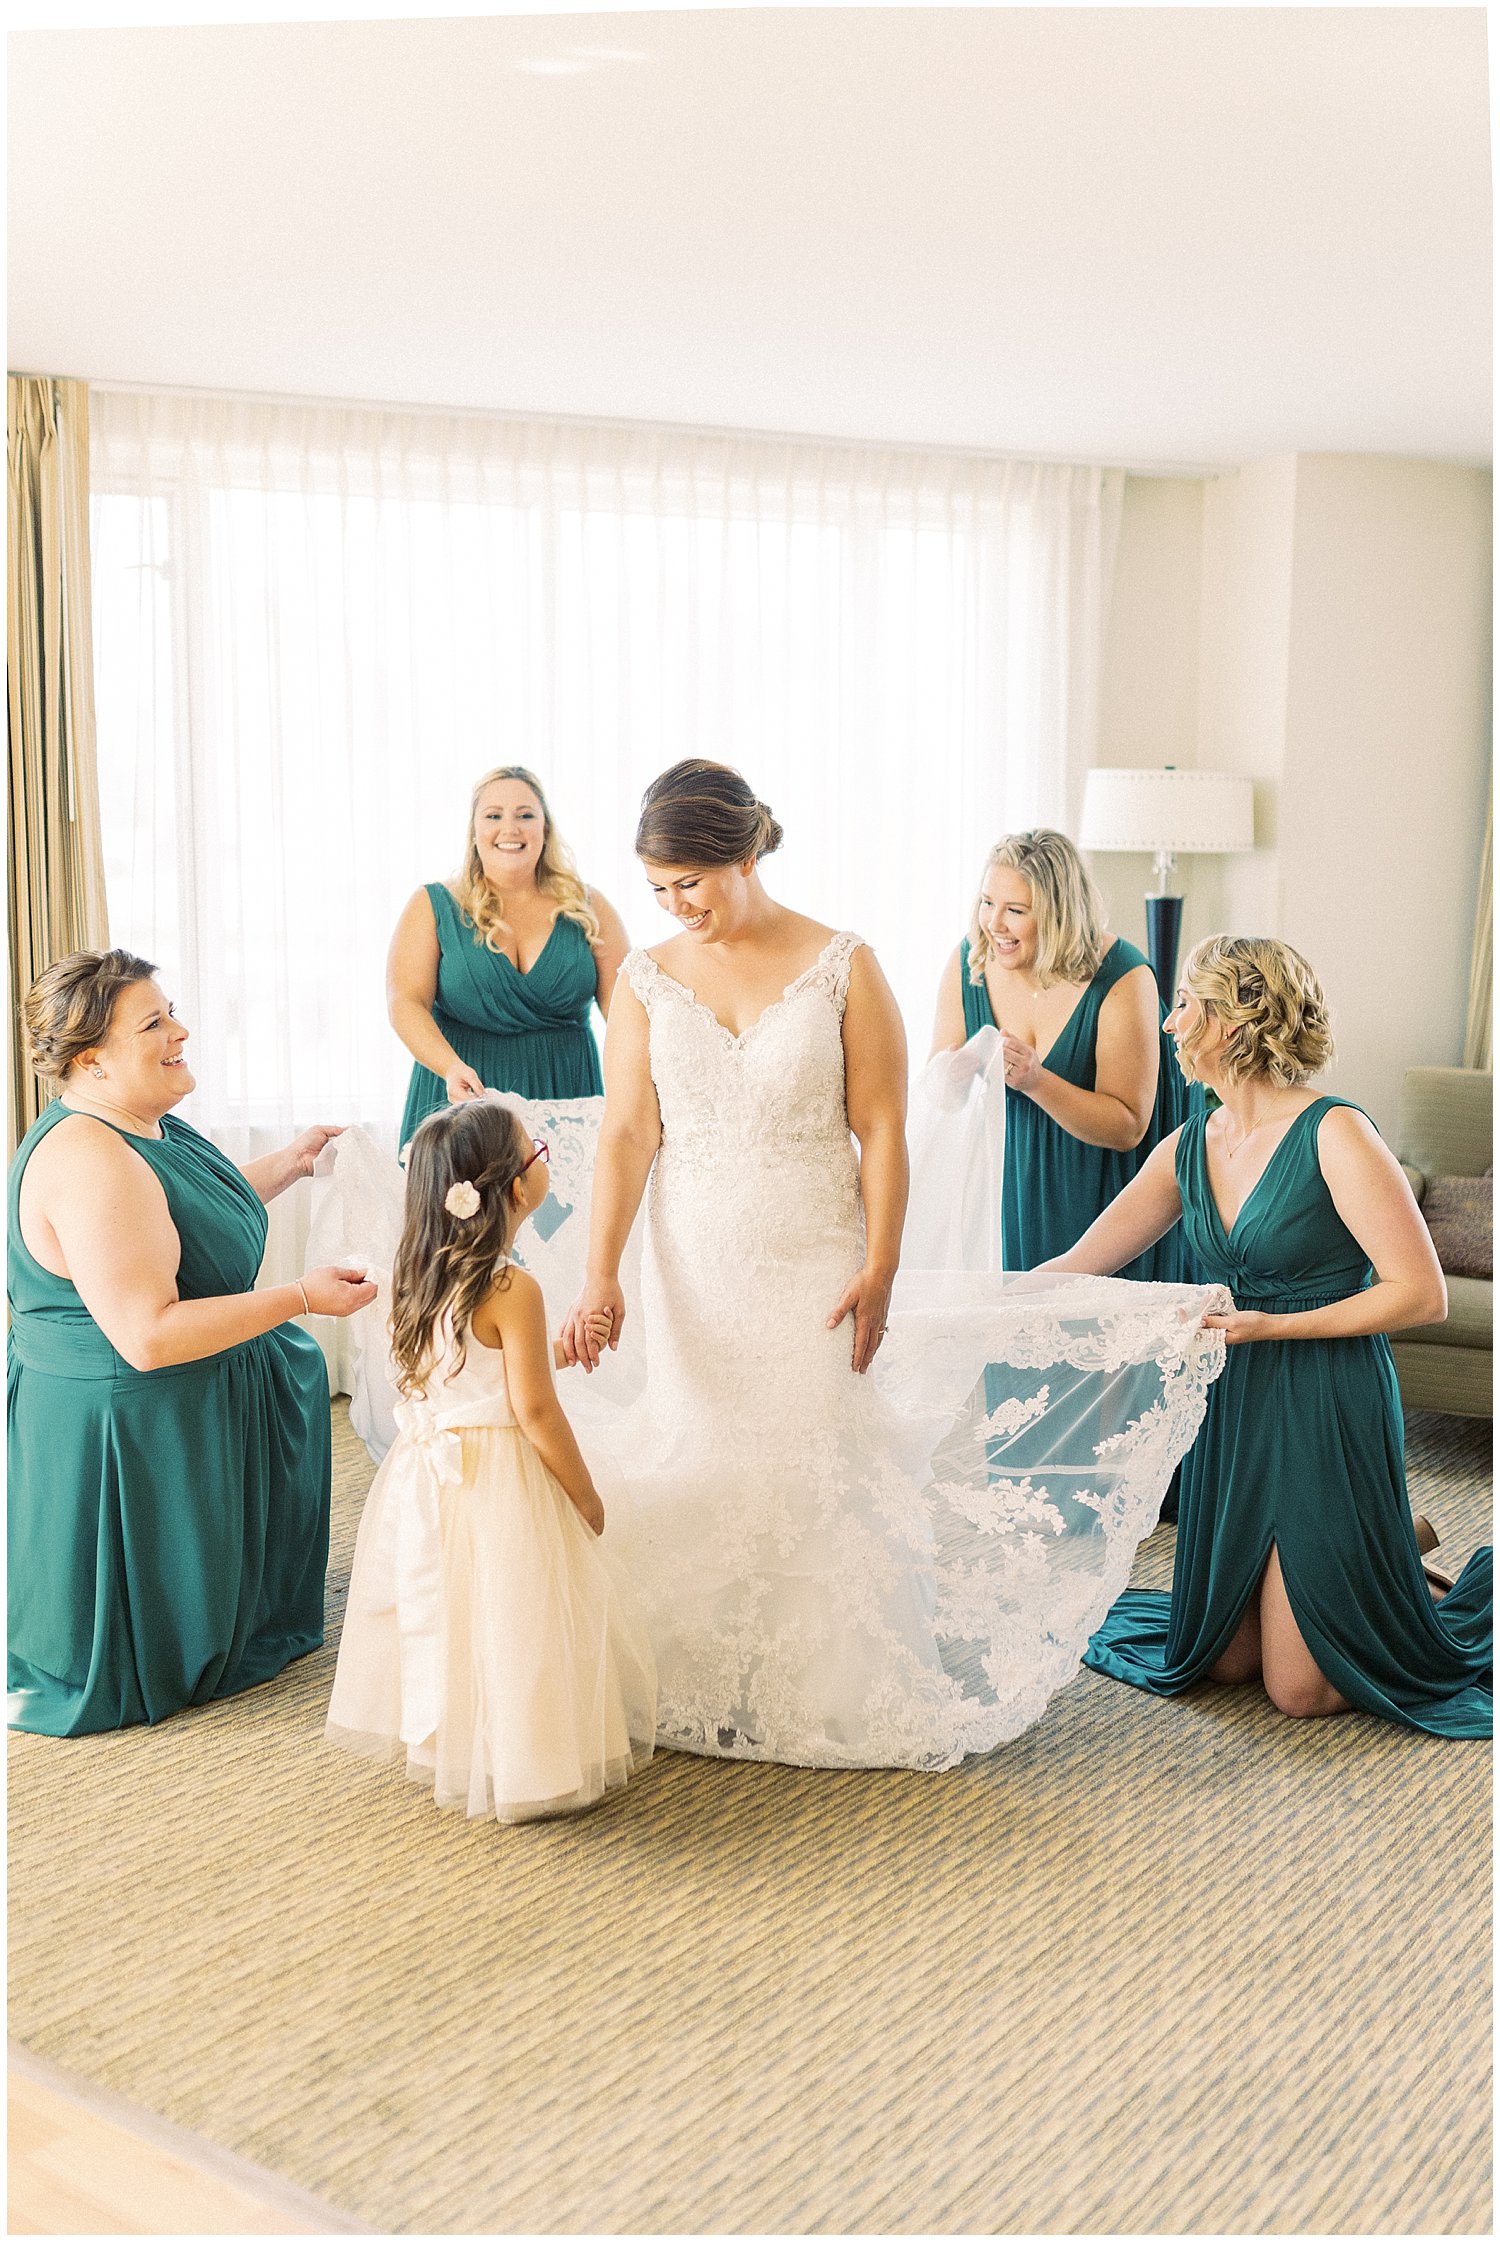 Bride with hunter green bridesmaid dresses from Azazie